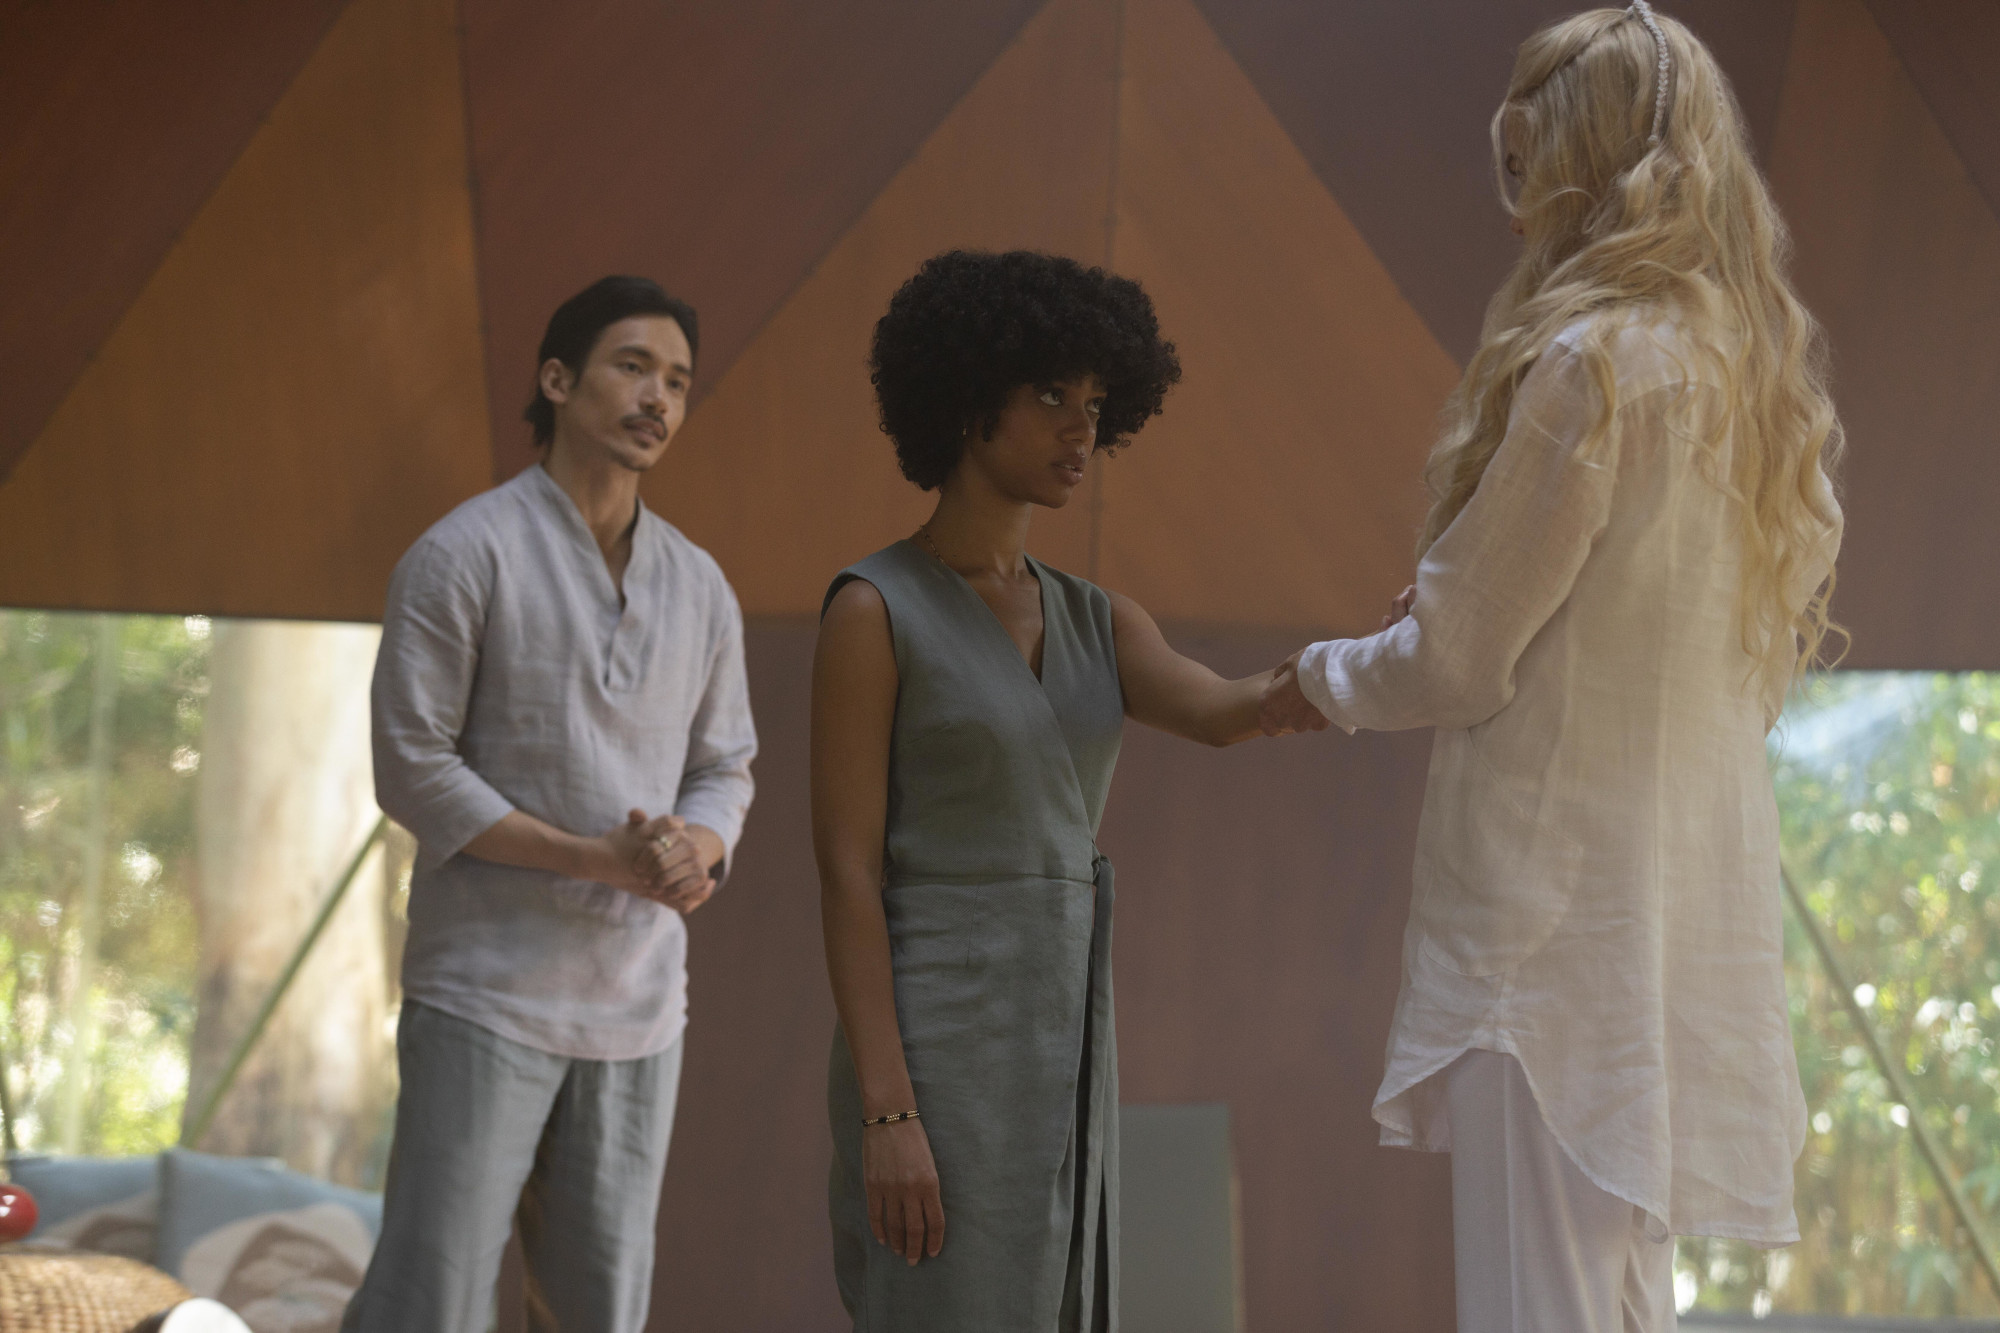 Manny Jacinto, Tiffany Boone, and Nicole Kidman in the cast of Hulu's 'Nine Perfect Strangers.' Jacinto's character wears all white and stands back while Boone's character, in grey, stares at Kidman. Kidman has her hand resting on Boone's shoulder, and she's turned away from the camera.